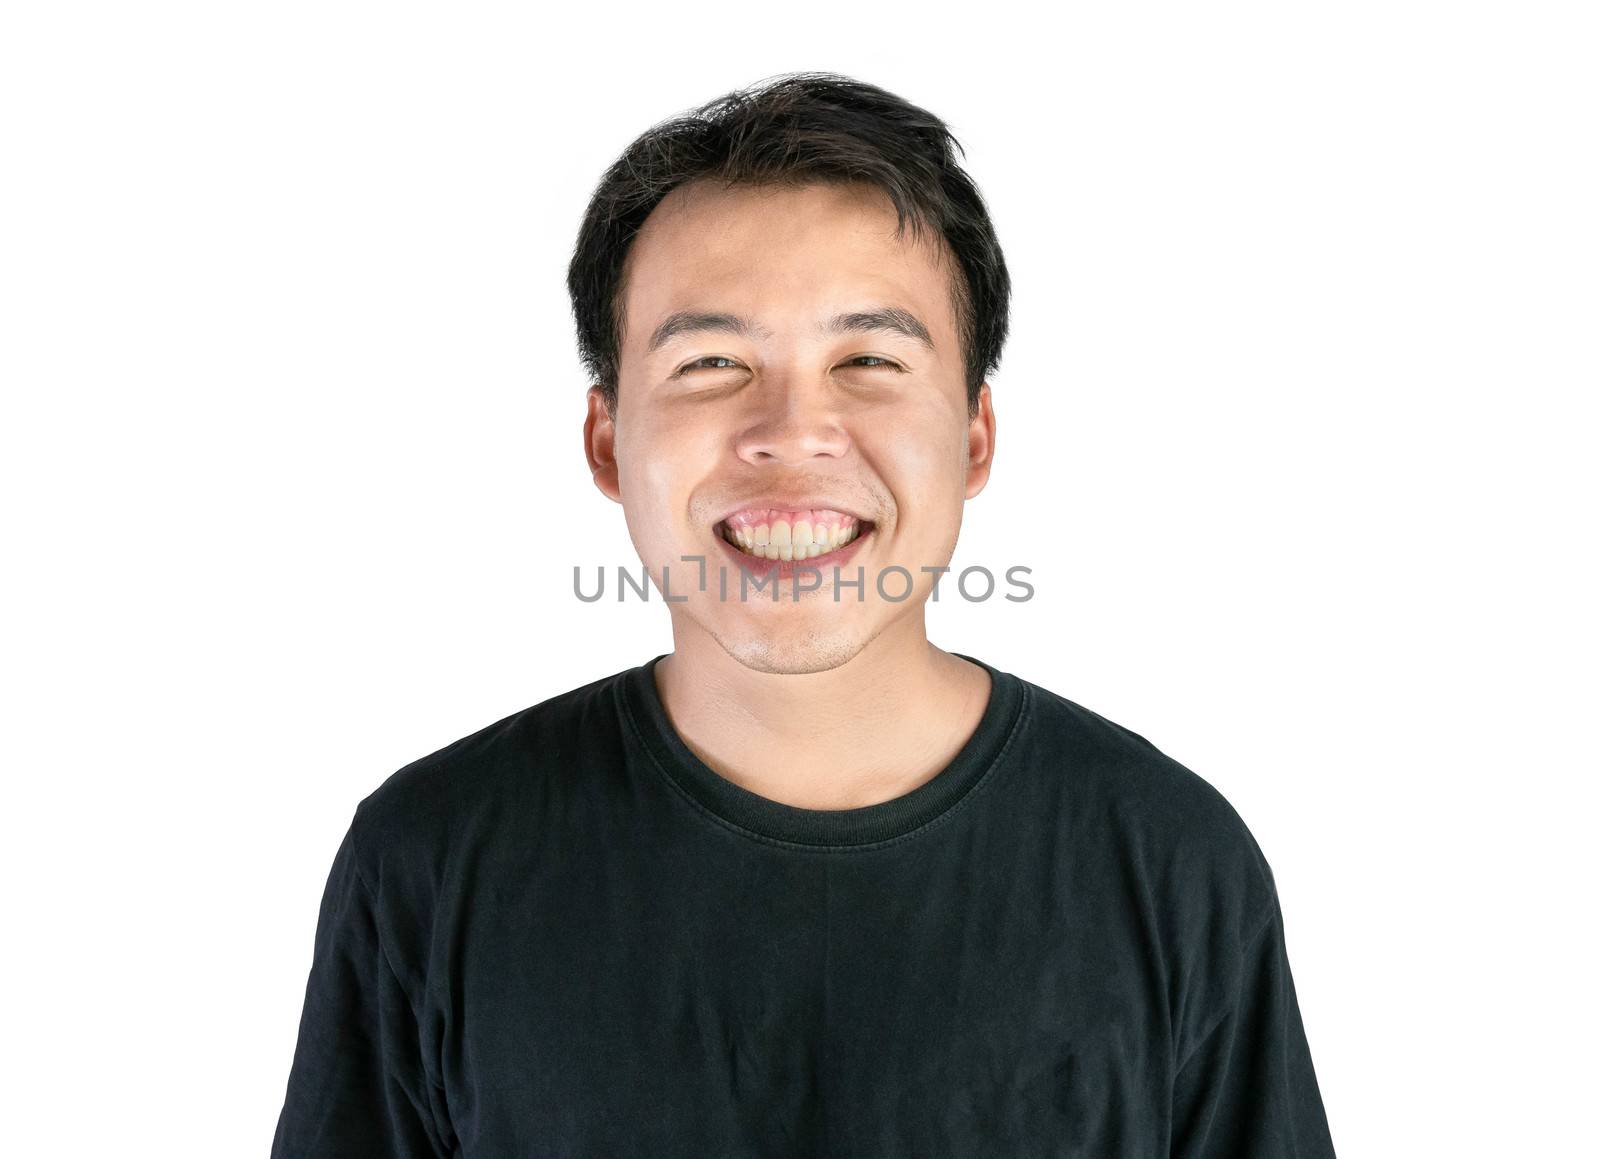 Happy and smile face of Asian man wearing black t-shirt isolated on white background.